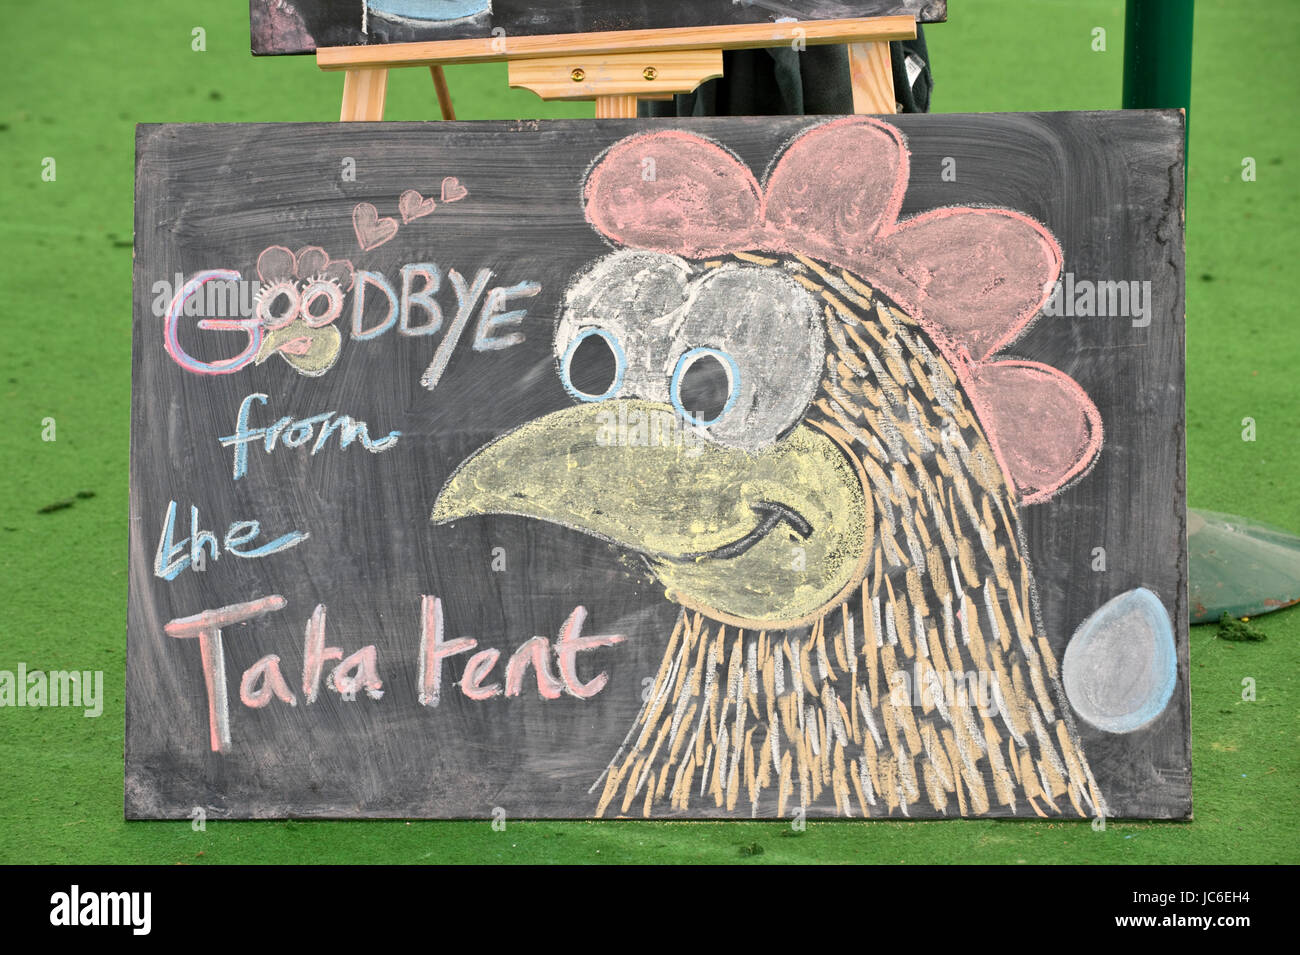 Goodbye from Tata tent on blackboard final event at Hay Festival of Literature and the Arts 2017 Hay-on-Wye Powys Wales UK Stock Photo